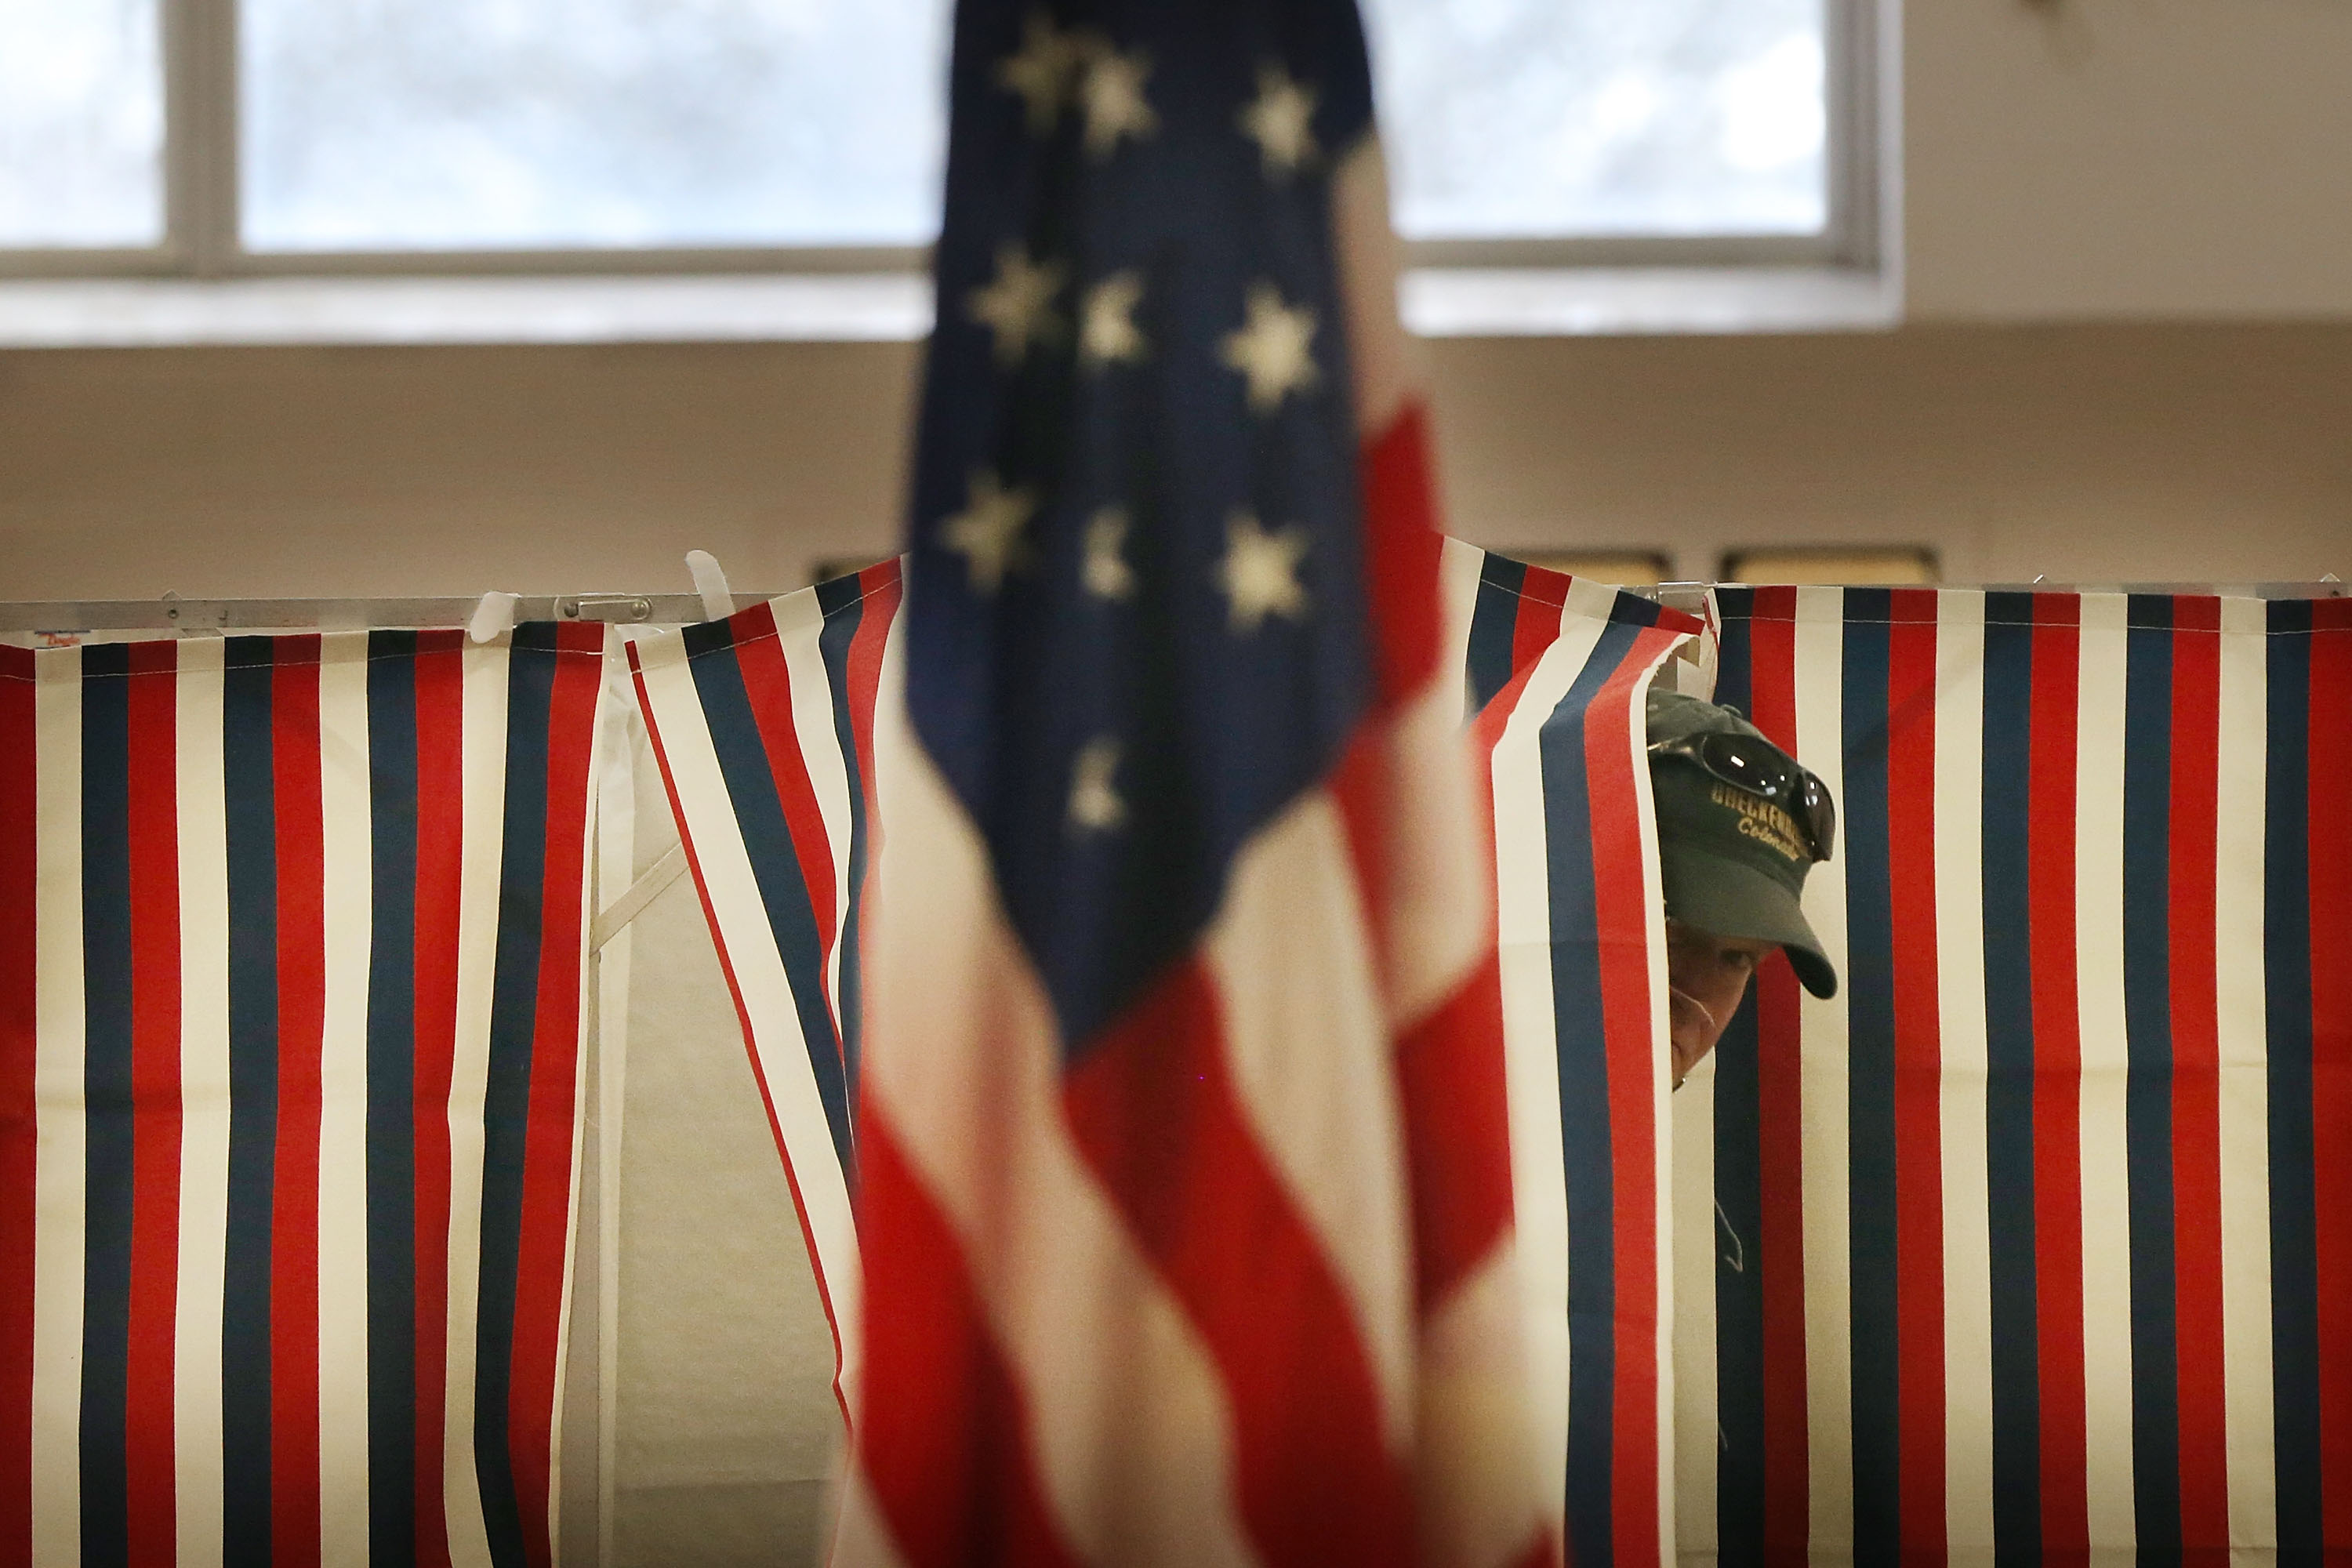 A New Hampshire man exits a voting booth during the presidential primaries.